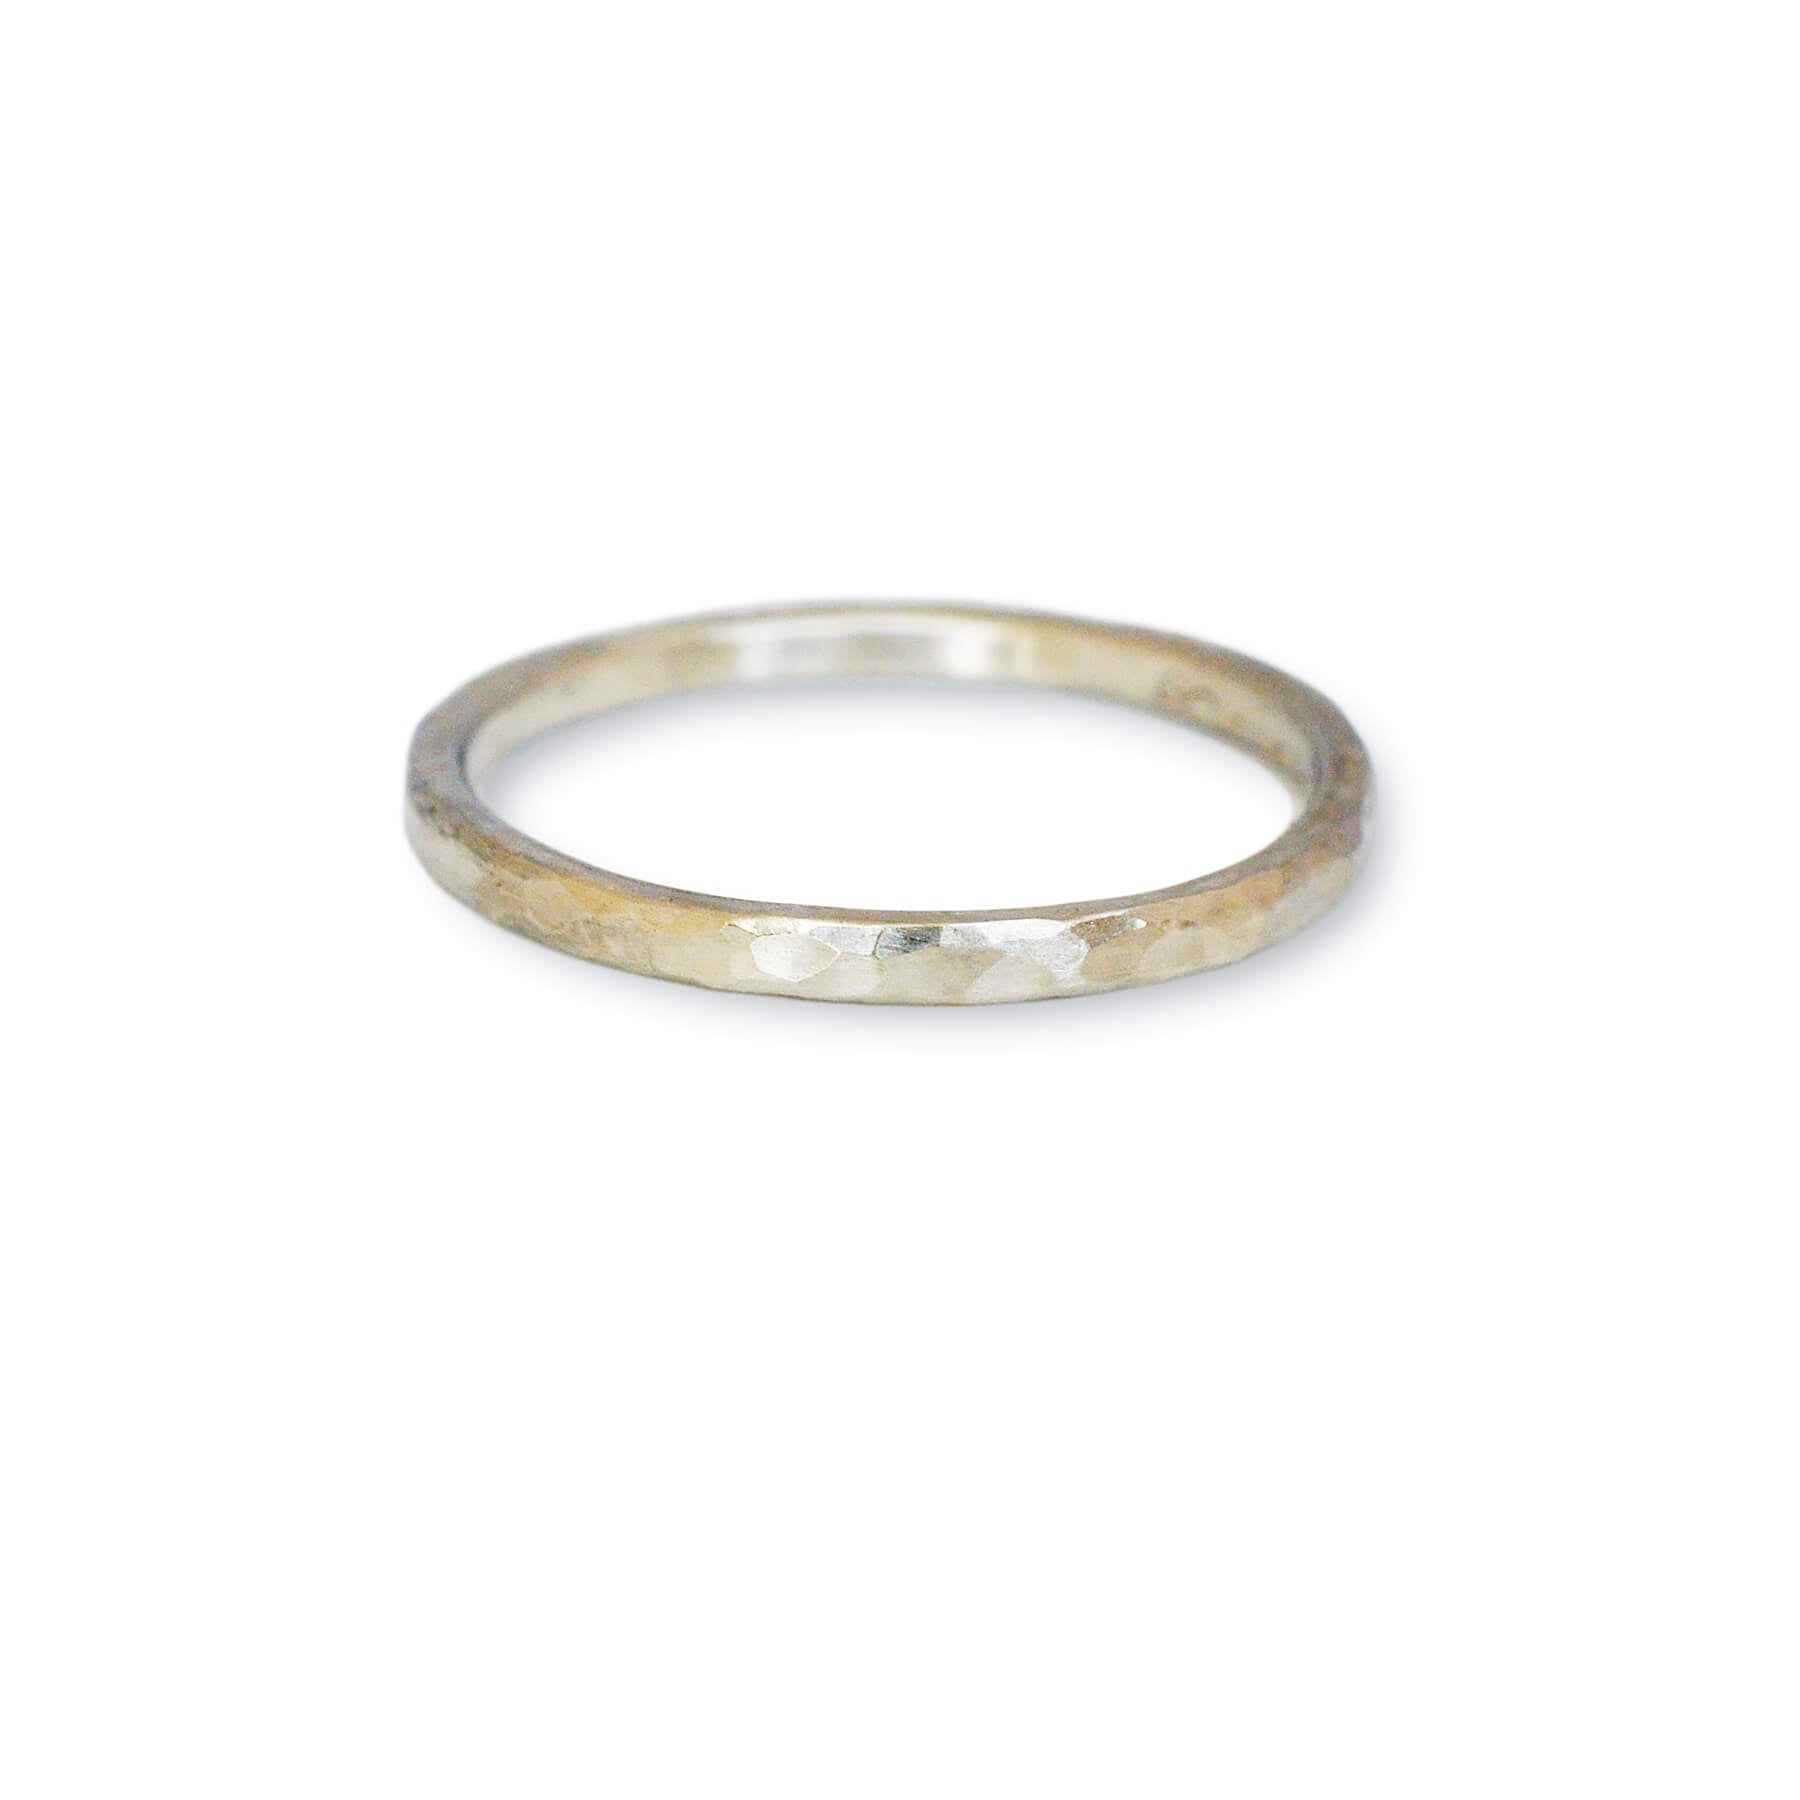 Hammered wedding band in 950 platinum. Handmade with recycled metal  by EC Design Studio in Minneapolis, MN.